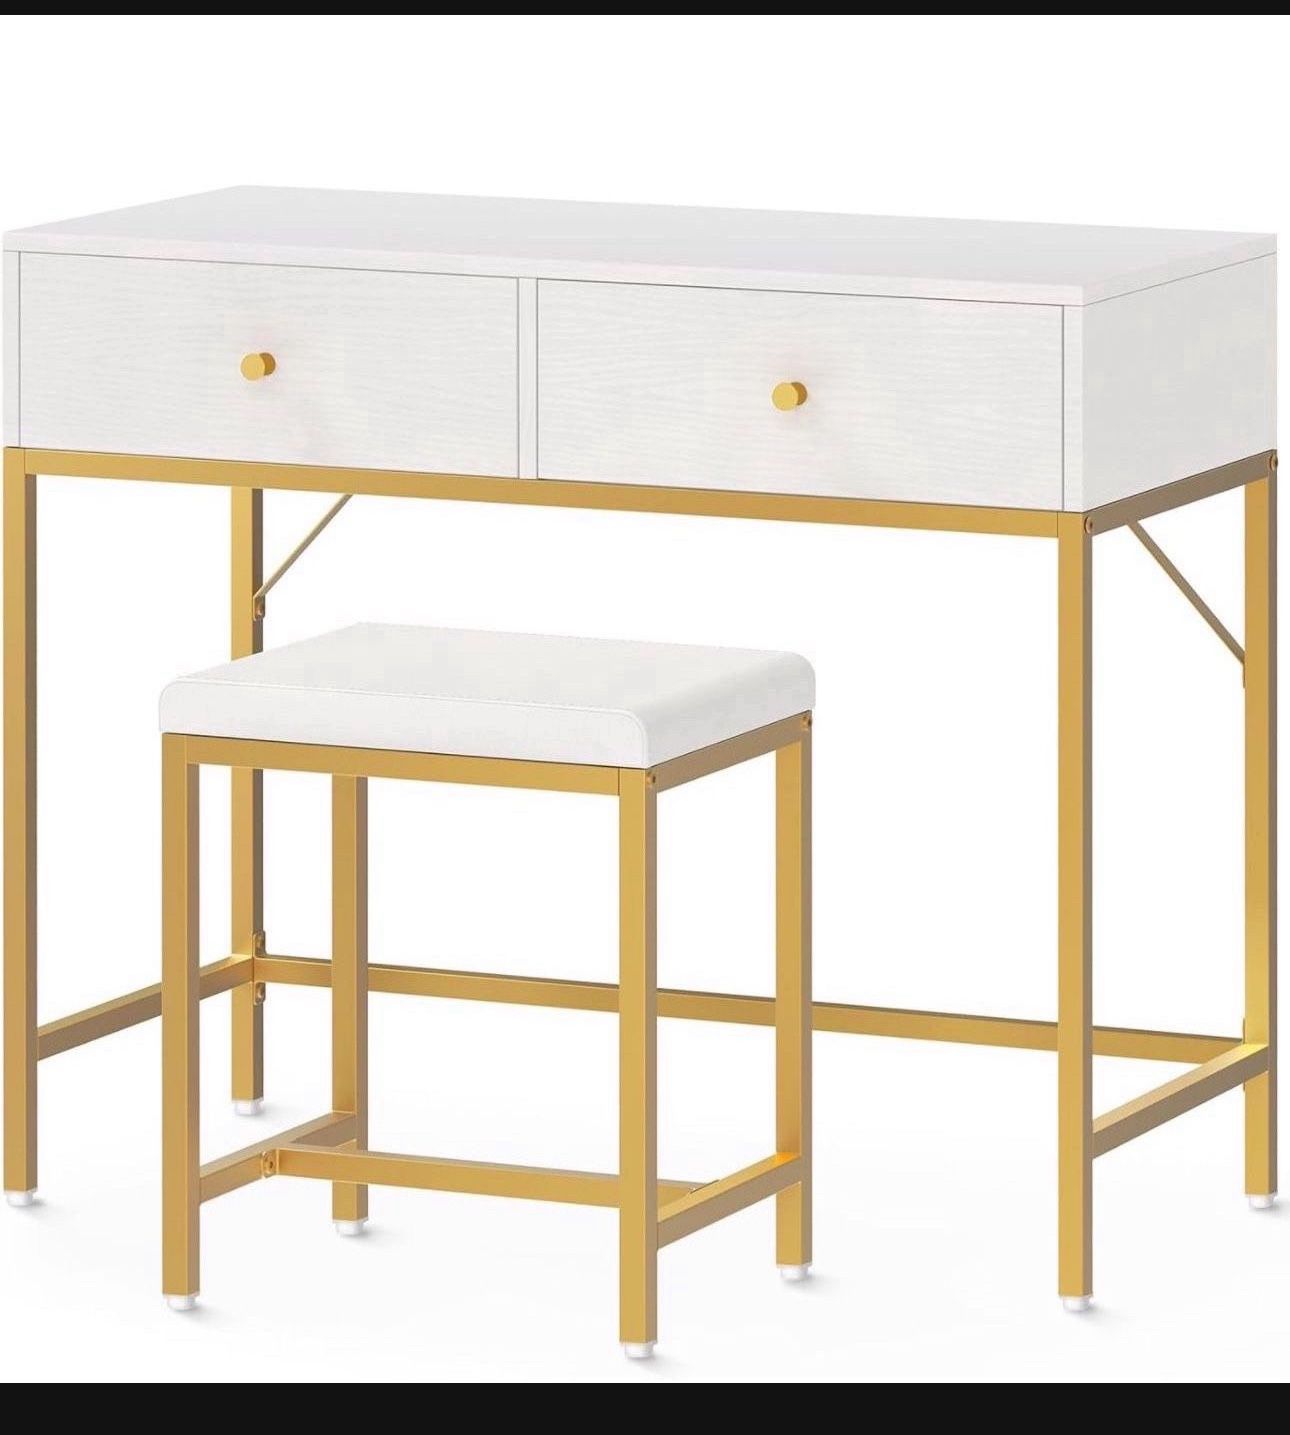 SUPERJARE 35.4" White and Gold Desk with 2 Drawers, Modern Makeup Vanity Desk with Padded Stool, Small Computer Desk Home Office Desk for Writing Stud